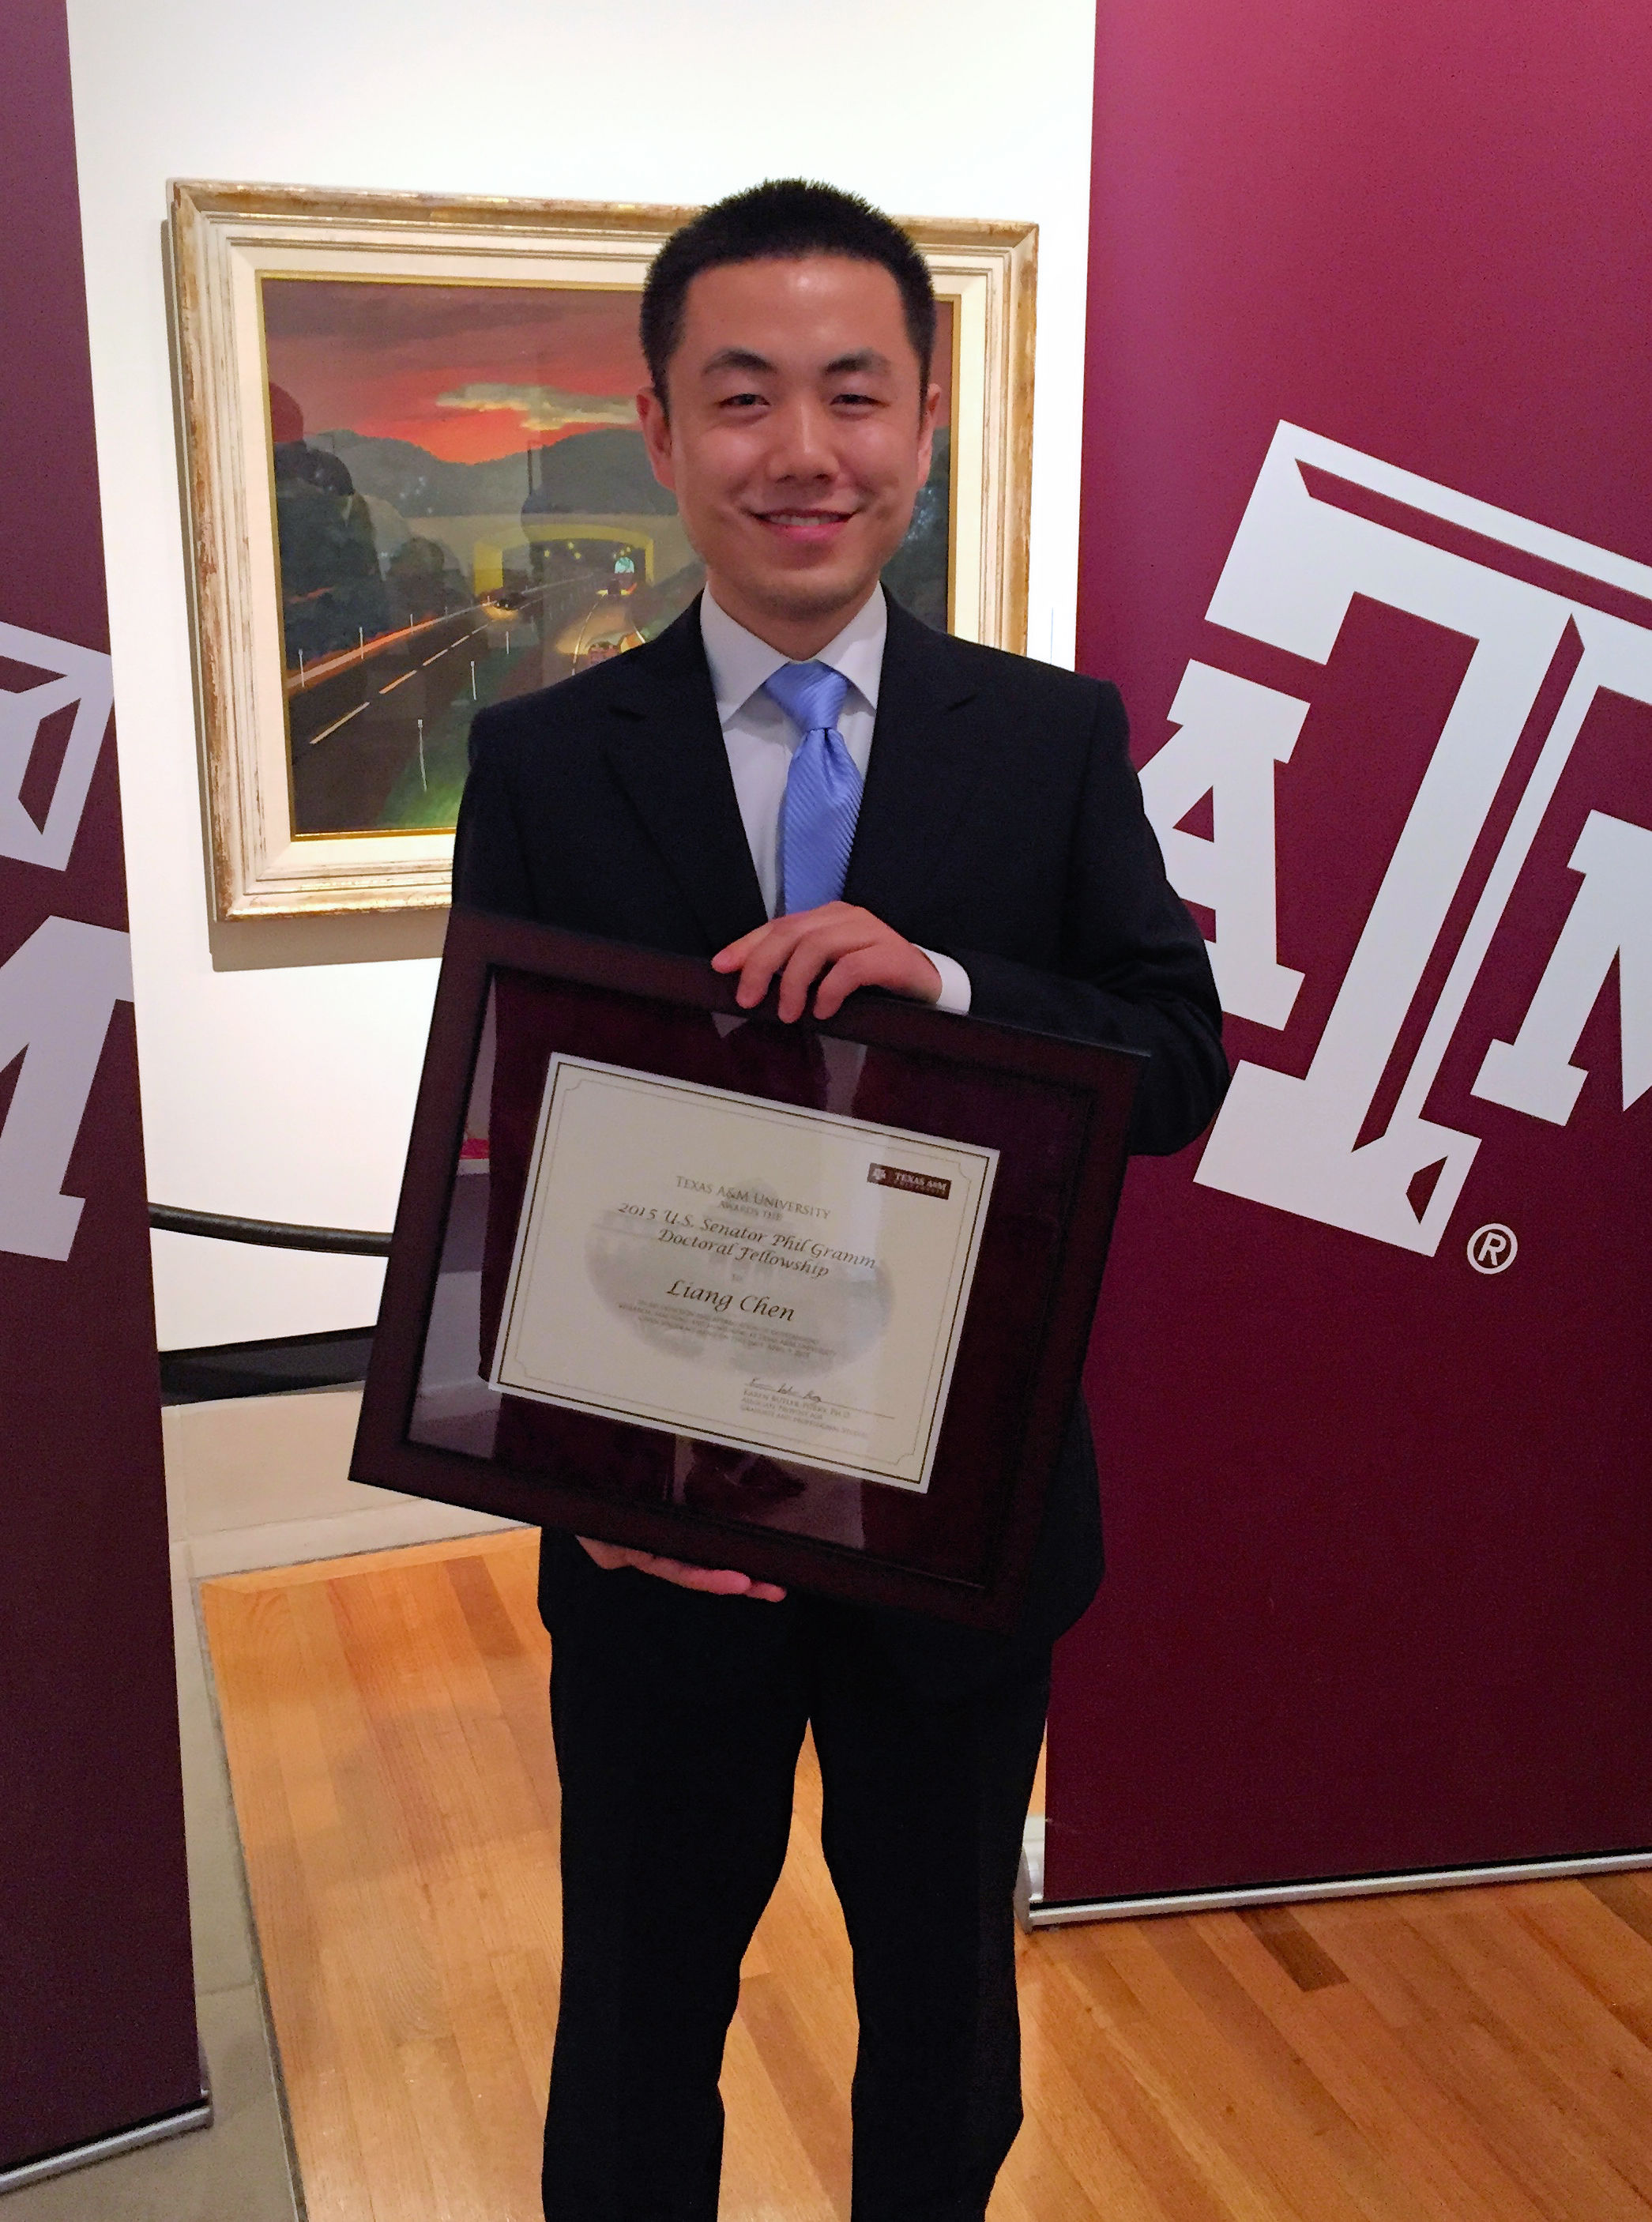  Liang Chen Wins Paper of the Year Award